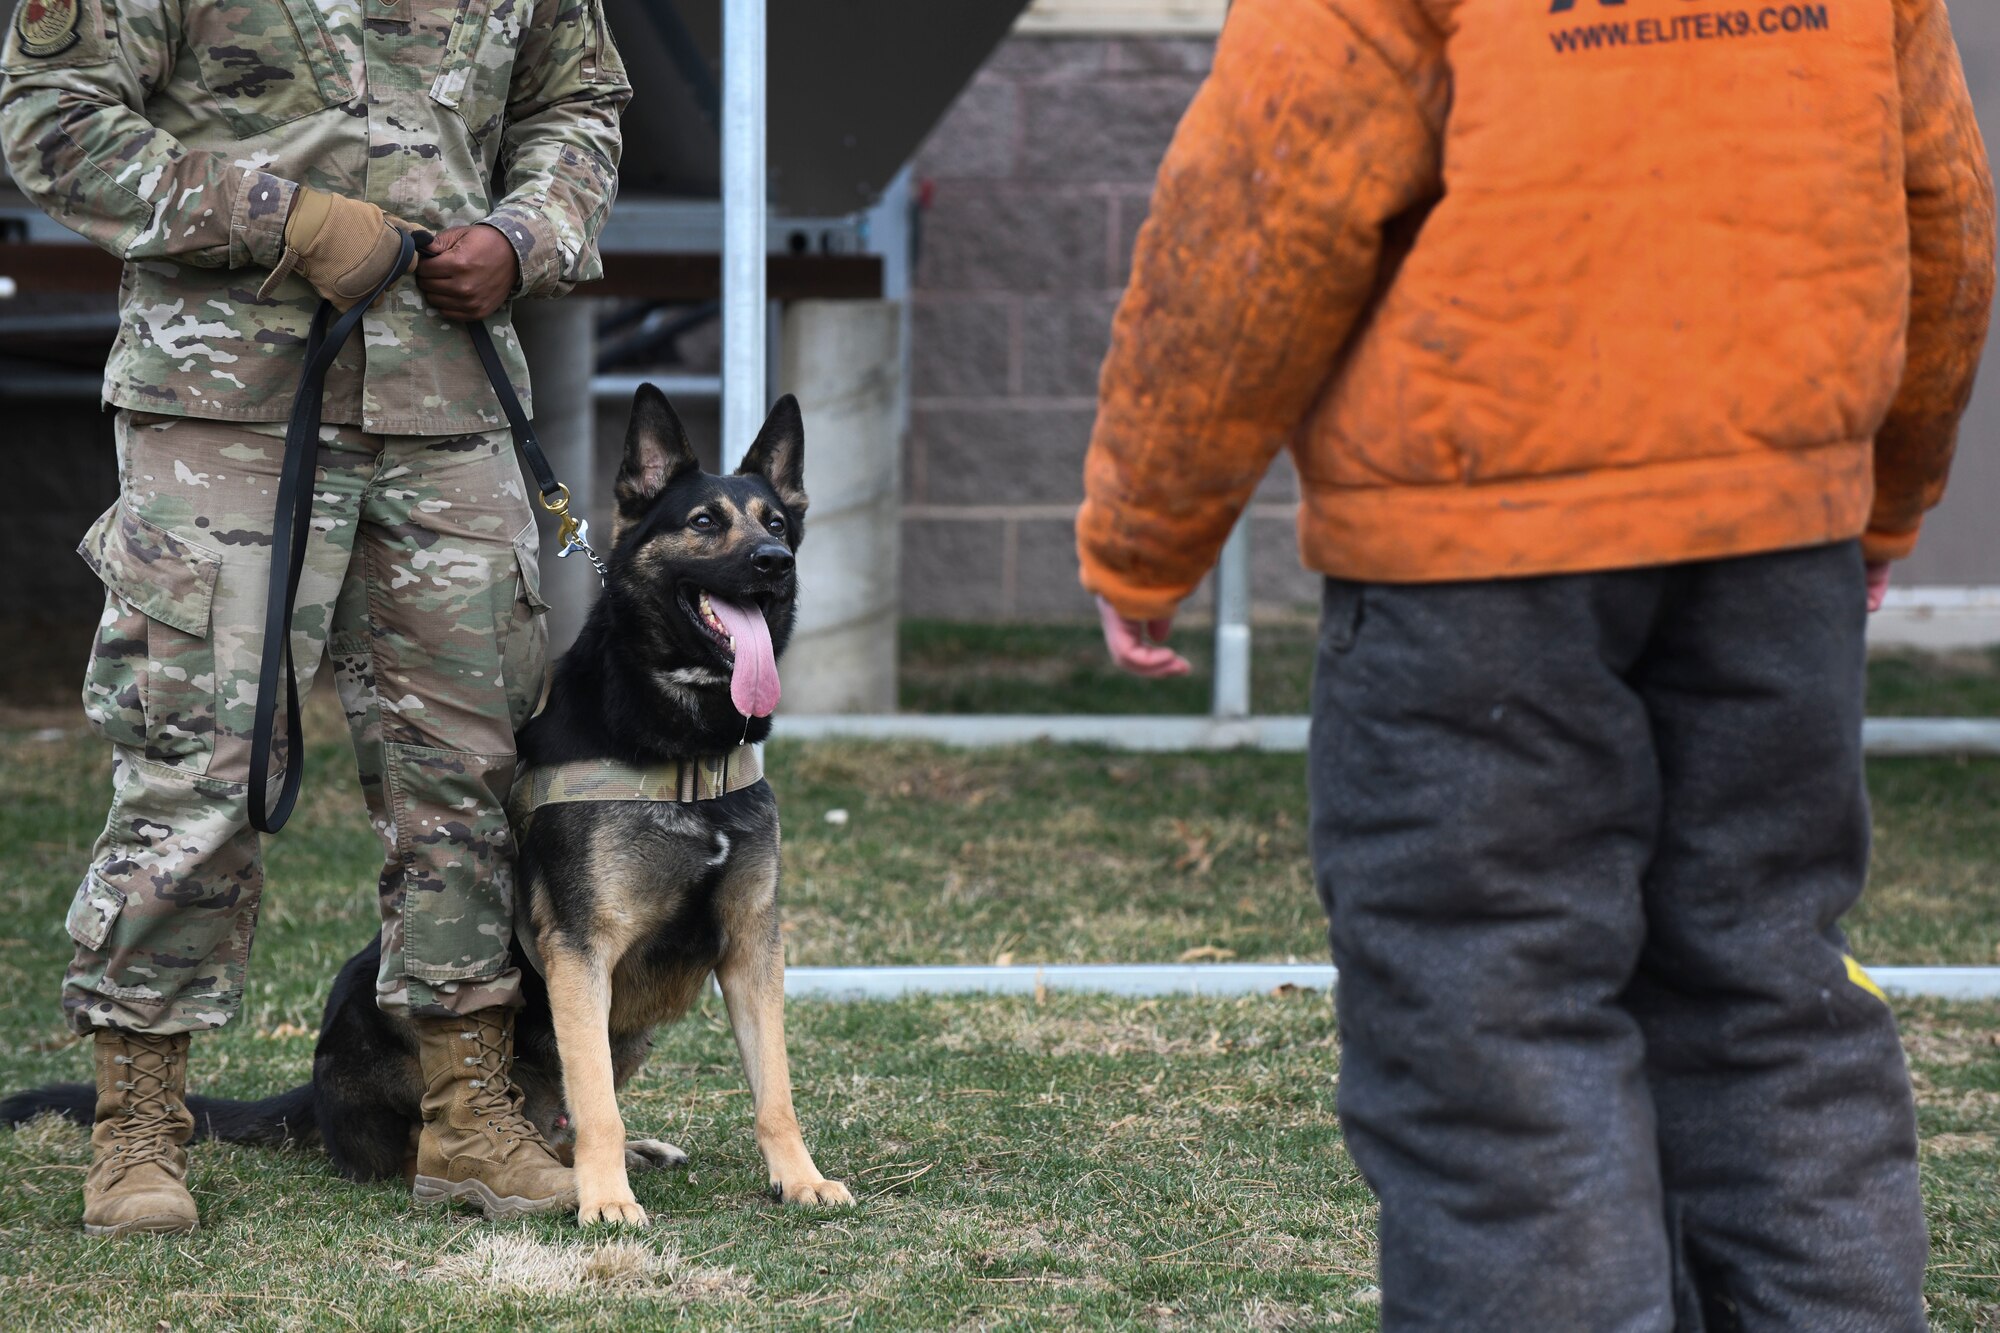 A German Shepard military working dog stares at someone wearing a bite suit acting as a perpetrator during an interrogation while his handler stands beside him.